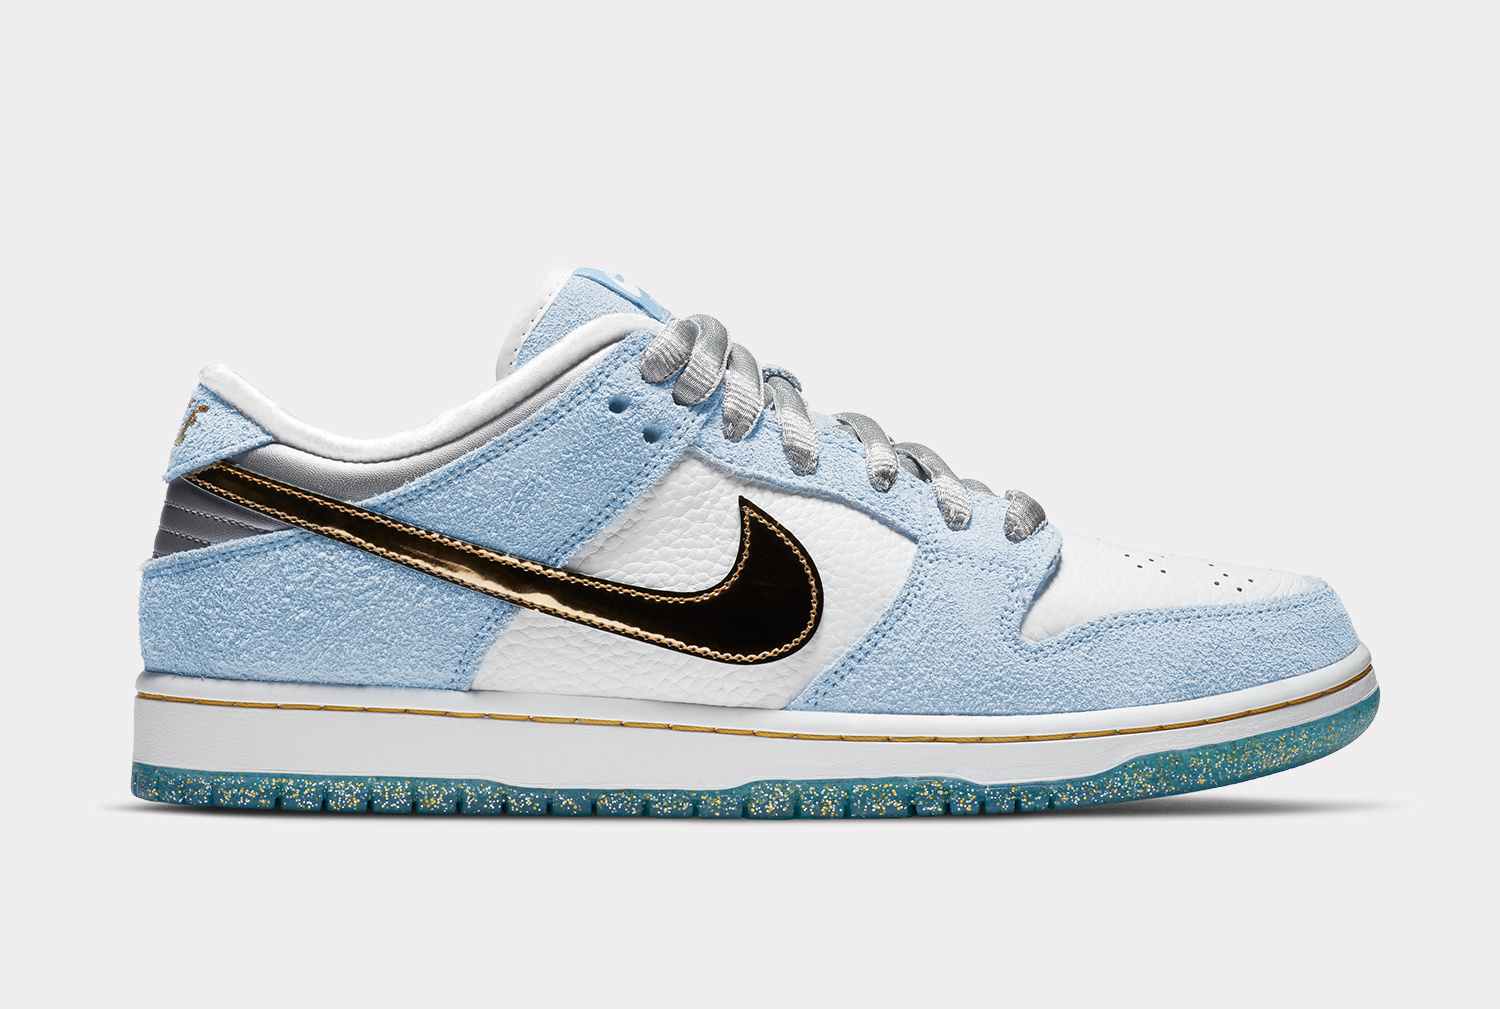 17.12.20 - Nike SB x Sean Cliver Dunk Low Pro "HOLIDAY SPECIAL"